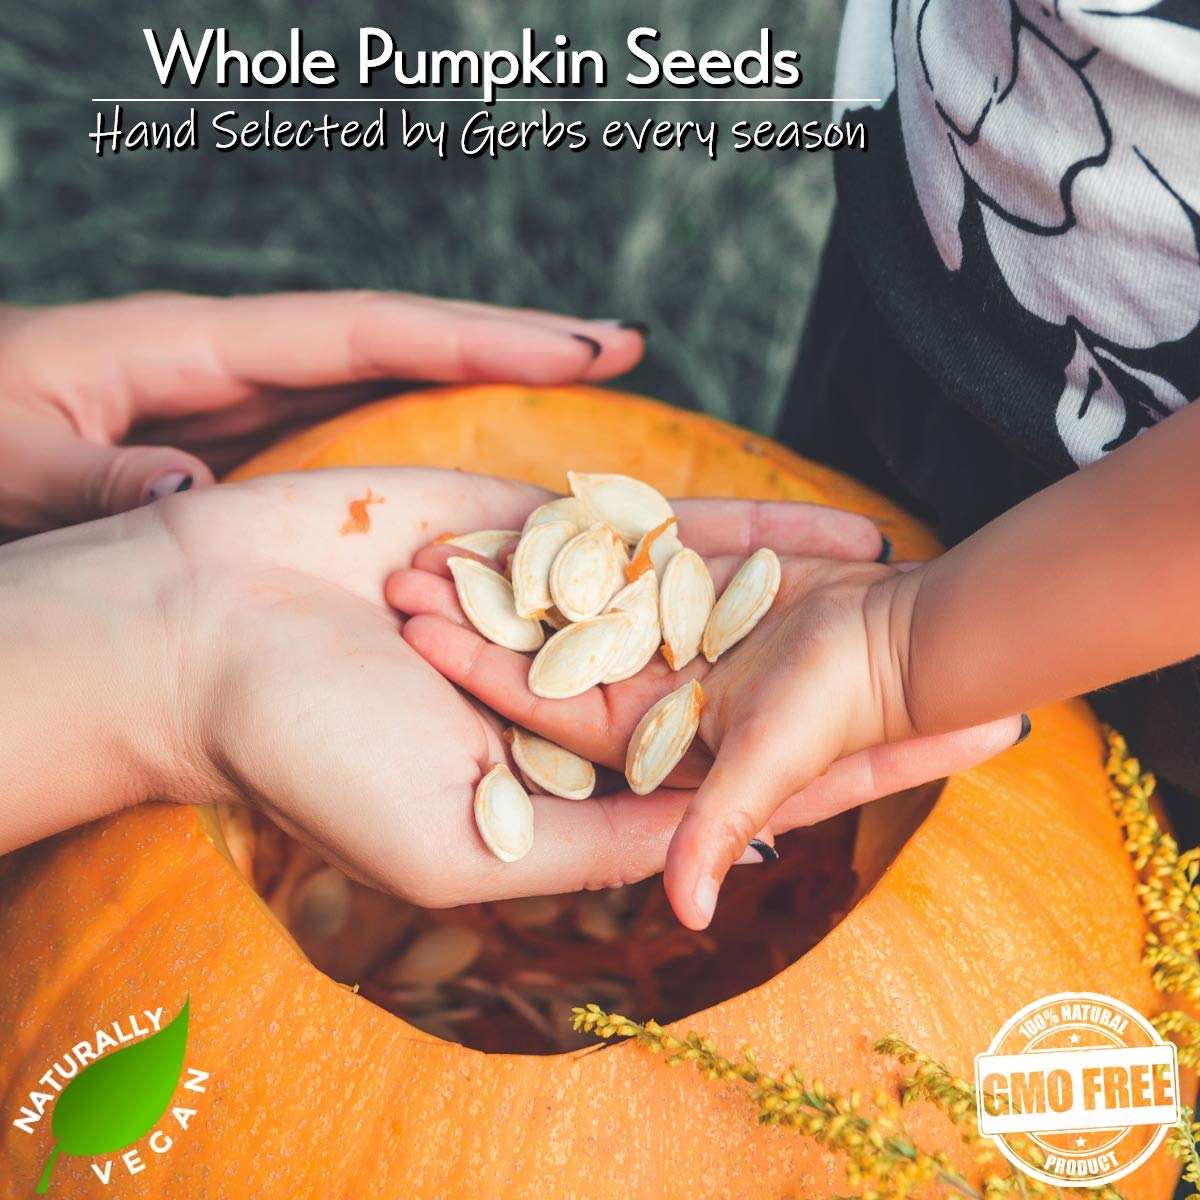 GERBS Extra Sea Salted Whole Pumpkin Seed 4 LBS, Top 14 Allergy Free, Protein packed Superfood Snack, Non GMO, Grown USA & Roasted small in batches : Snack Pumpkin Seeds : Grocery & Gourmet Food